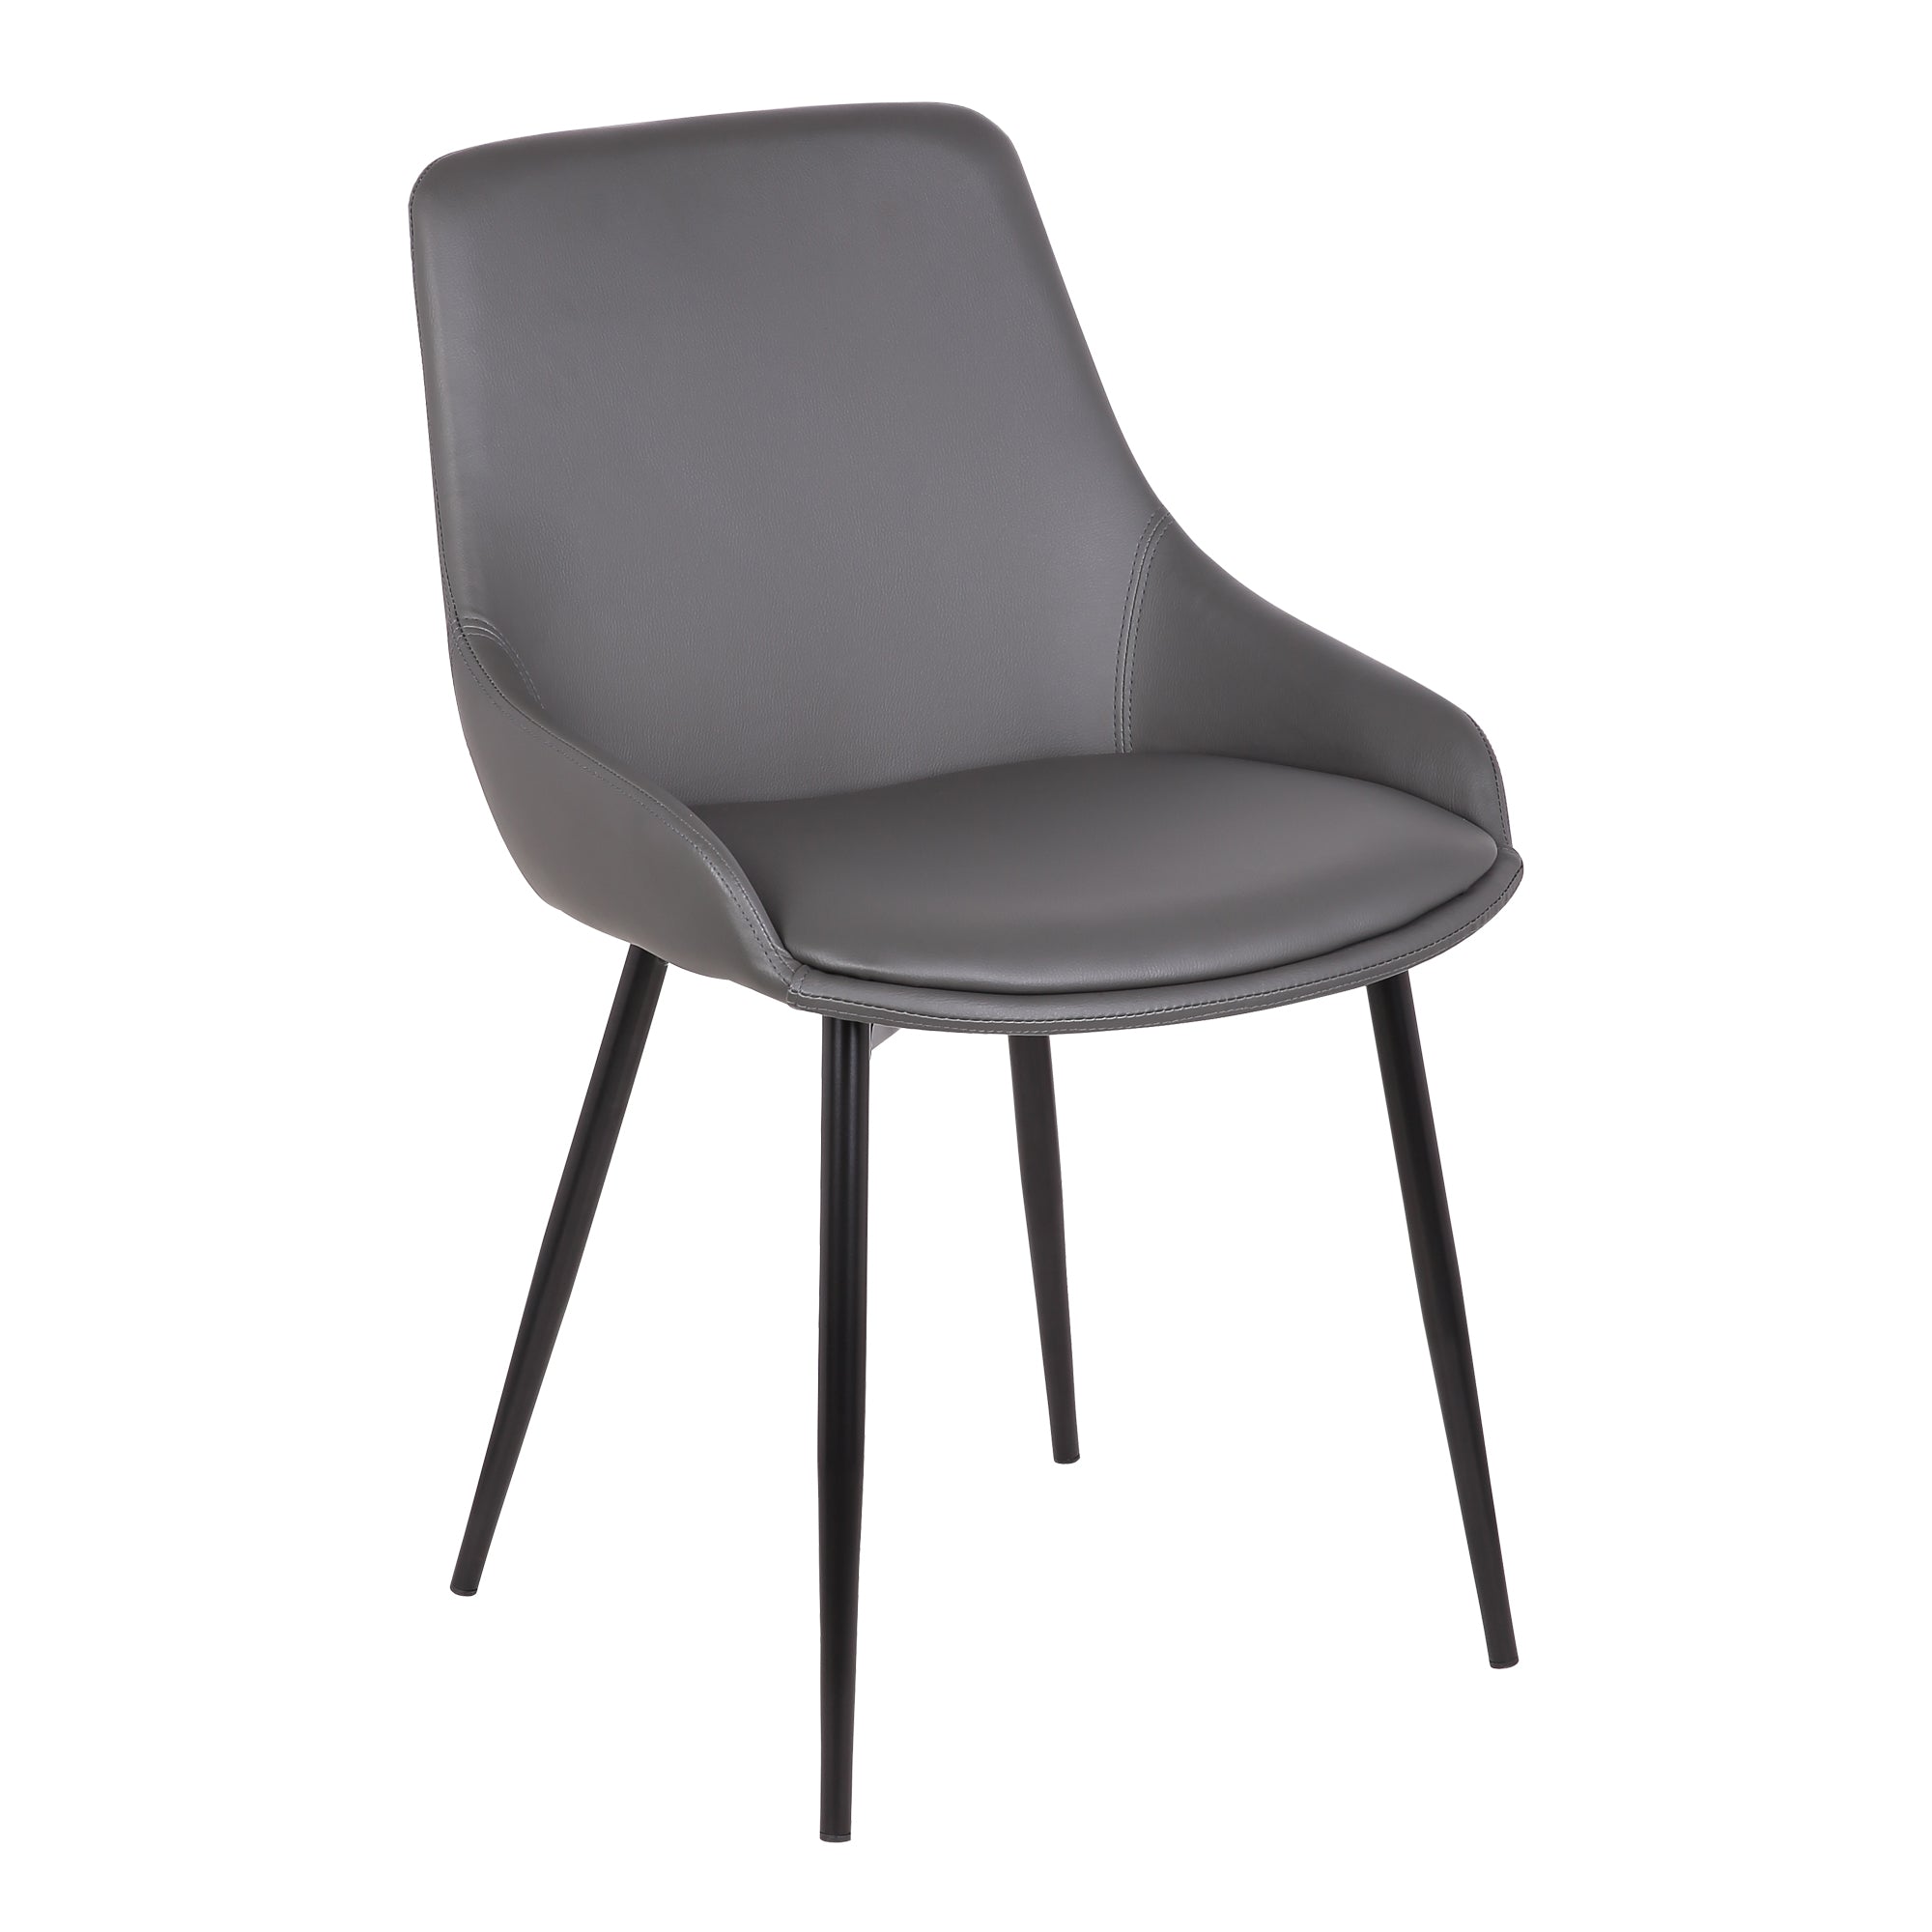 Armen Living Lcmichgrey Mia Contemporary Dining Chair In Gray Faux Leather With Black Powder Coated Metal Legs